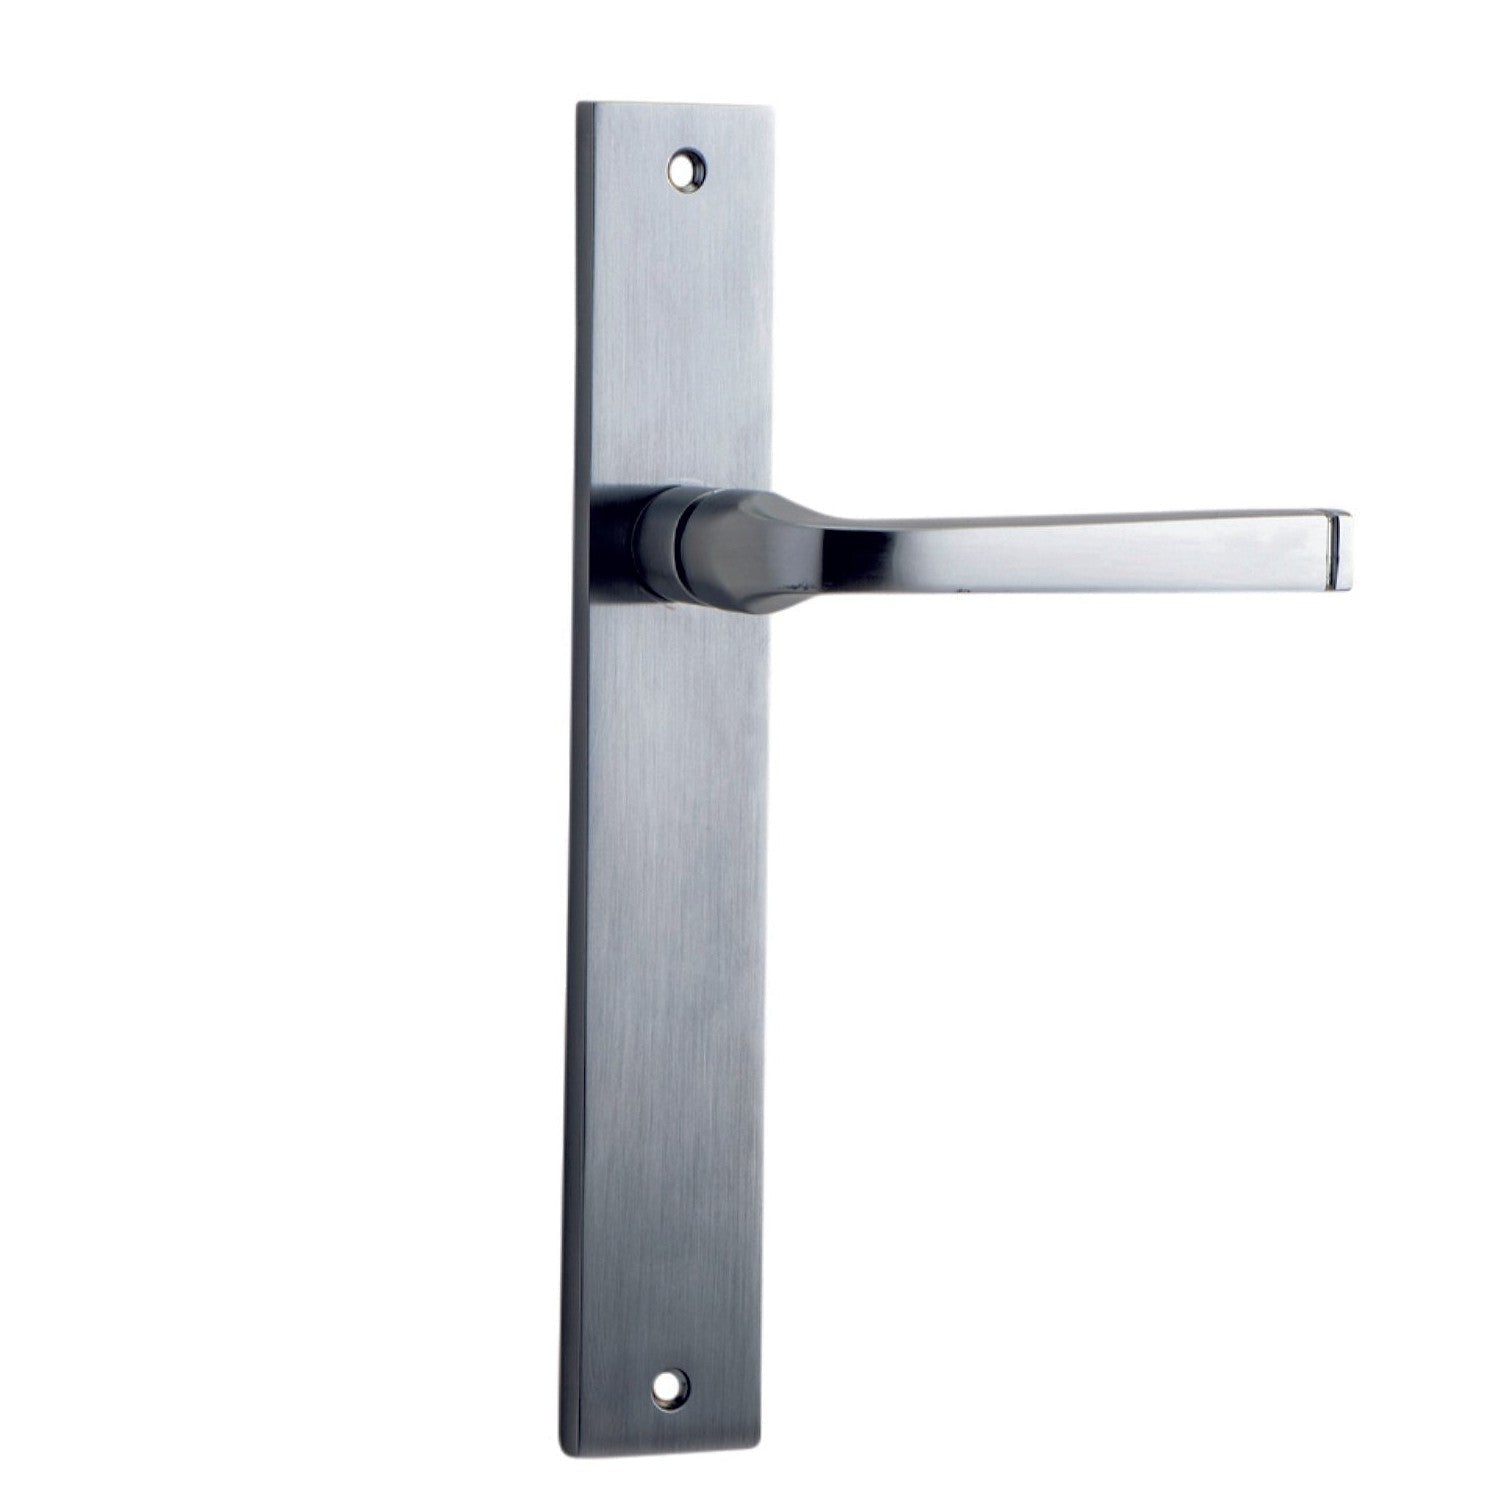 Iver Door Handle Annecy Rectangular Latch Pair Brushed Chrome